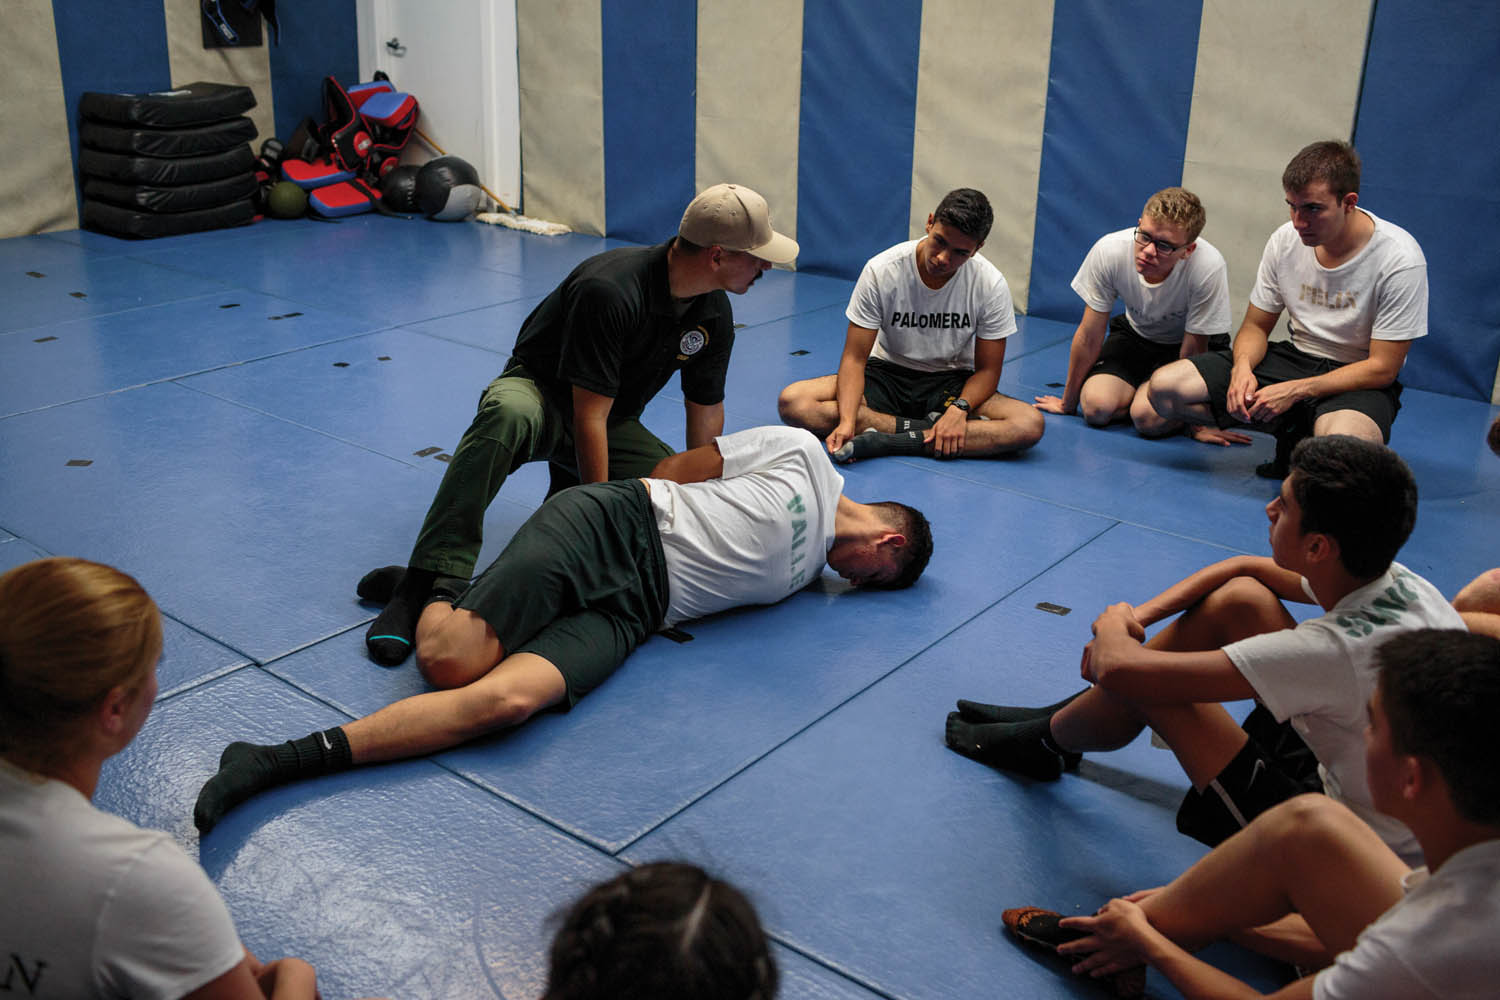 Lenny Queriapa, instructor of the Border Patrol Explorer Program, leads a demonstration on handcuffing and search-and-arrest at local Border Patrol Post 125 (Nogales, AZ). The Explorer program offers fourteen- to twentyone-year-olds the opportunity to work with law enforcement and experience simulated border-patrol scenarios. Photographed by Sarah Blesener